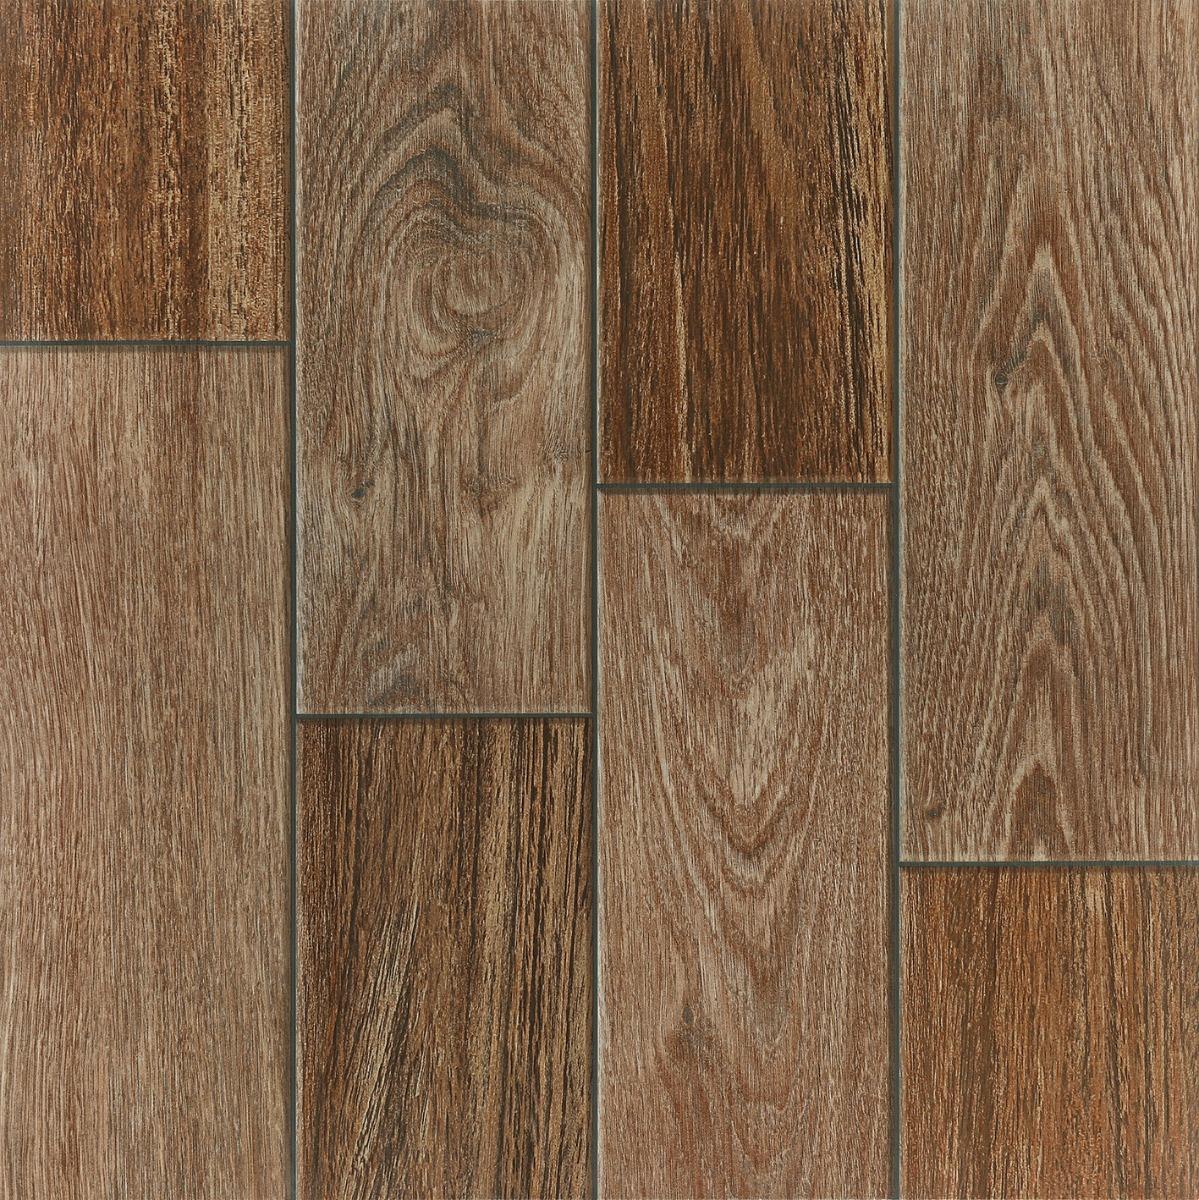 Accent Tiles for Living Room Tiles, Balcony Tiles, Accent Tiles, Hospital Tiles, Automotive Tiles, Bar/Restaurant, Commercial/Office, Outdoor/Terrace